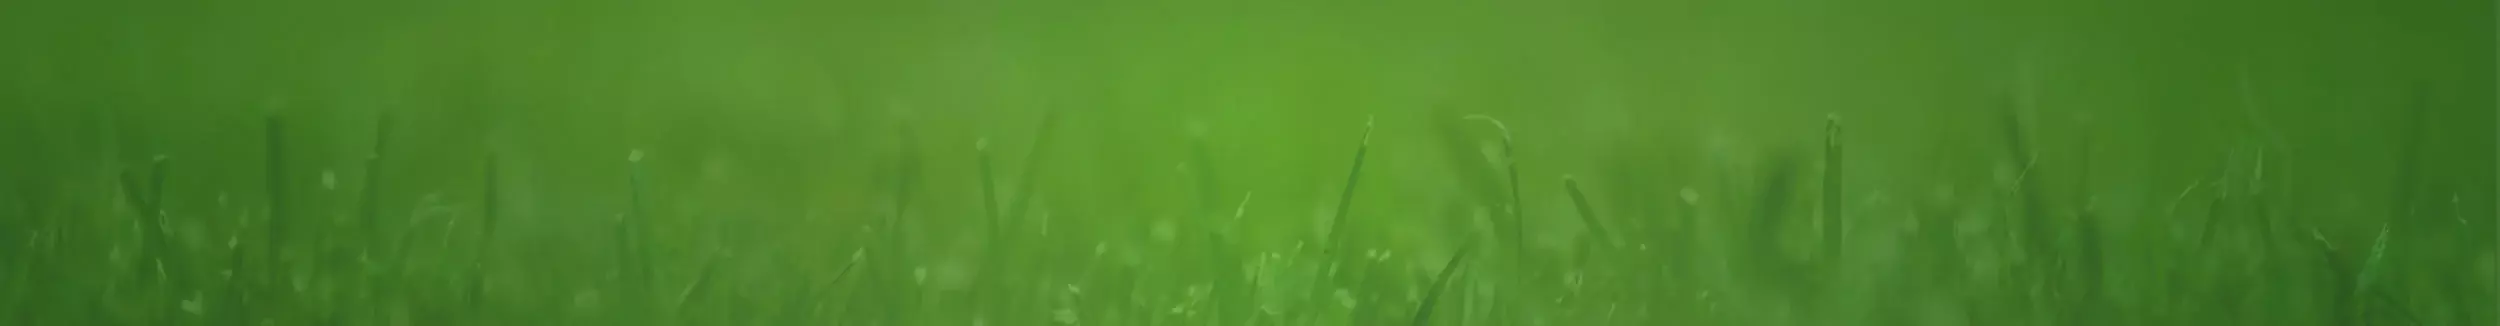 Blades of grass on green background